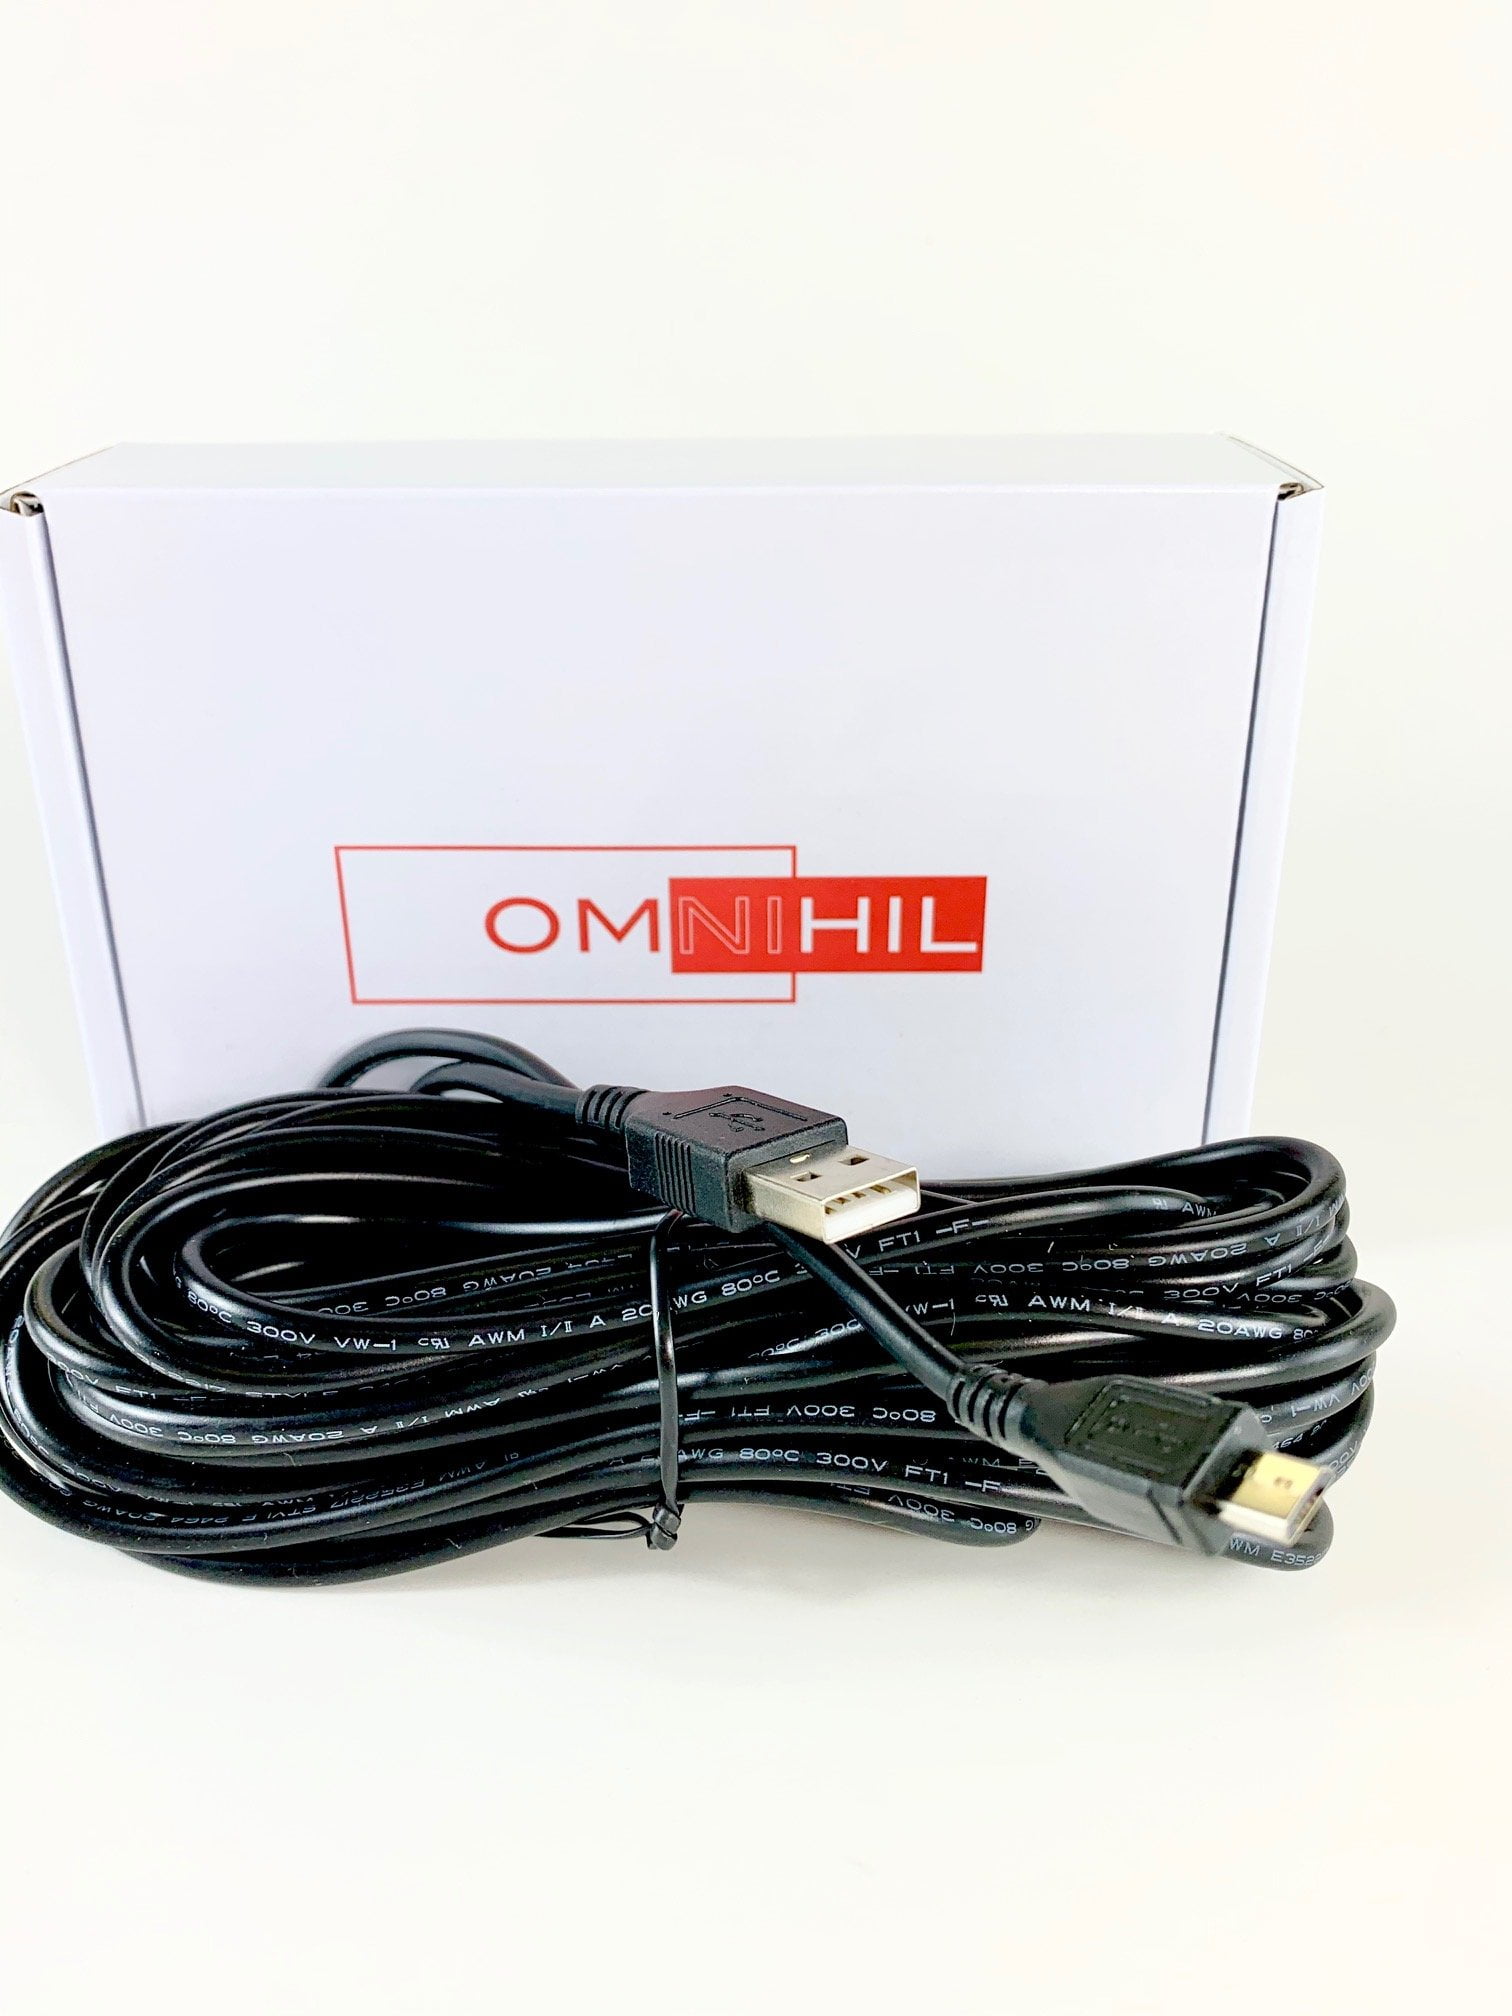 OMNIHIL 30 Feet Long High Speed USB 2.0 Cable Compatible with Cobra ACXT645 Walkie-Talkies 